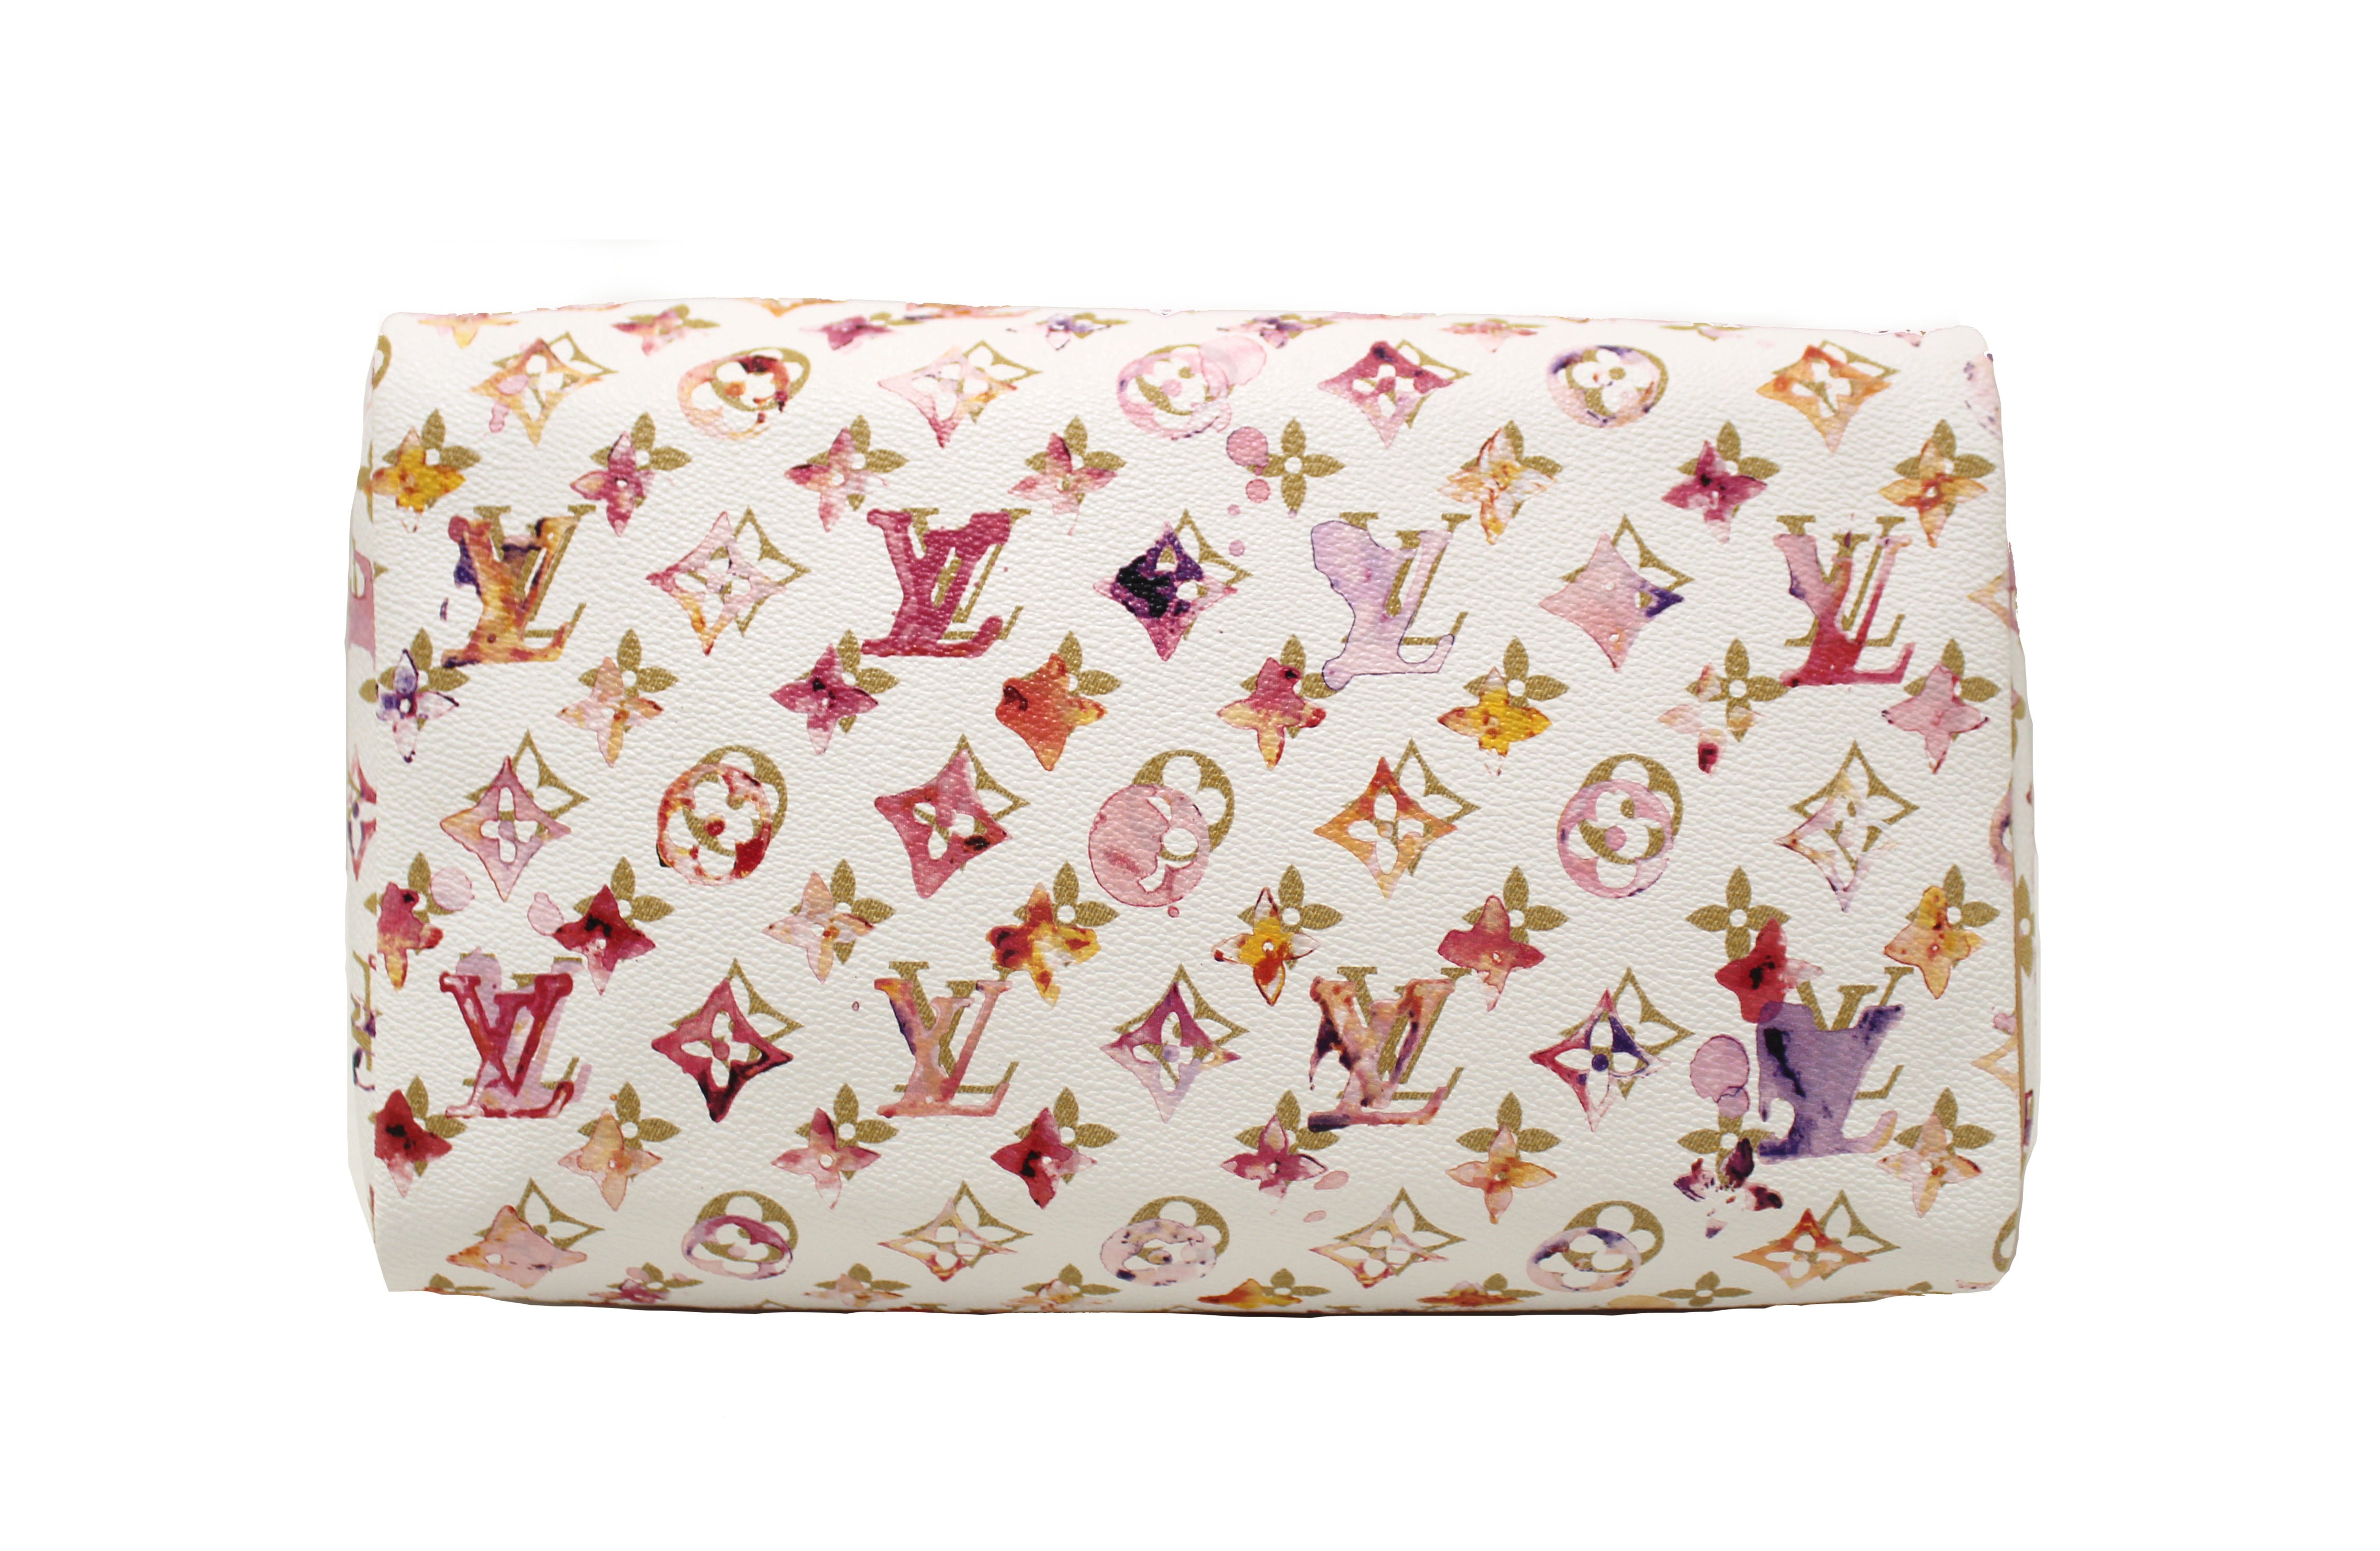 Louis Vuitton Limited Edition White Watercolor Aquarelle Speedy 30 Han –  Italy Station